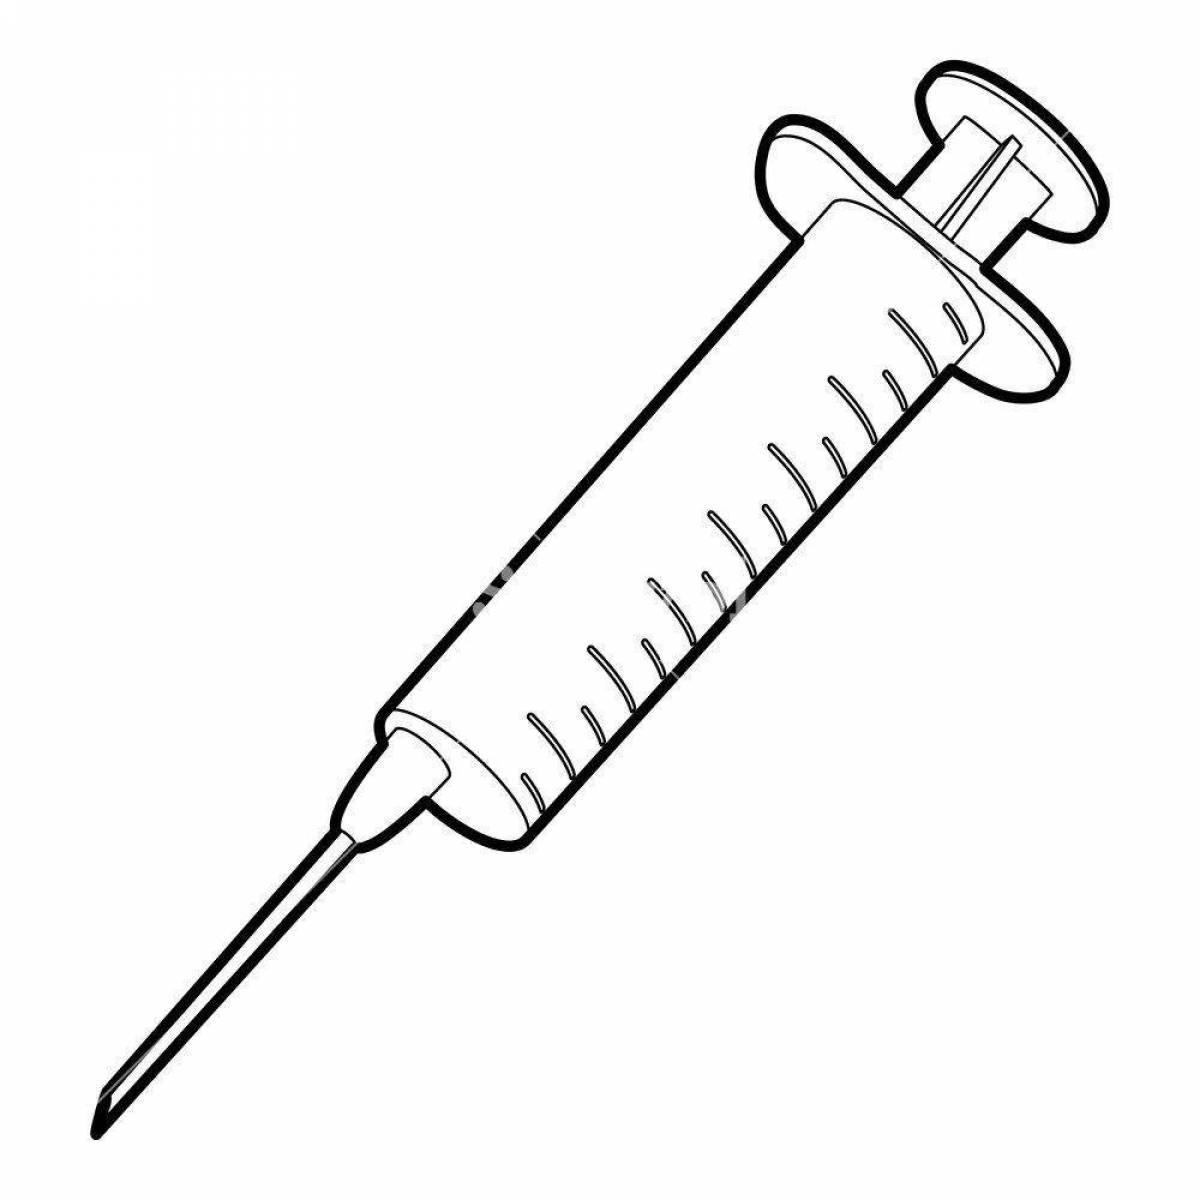 Humorous syringe with needle coloring book